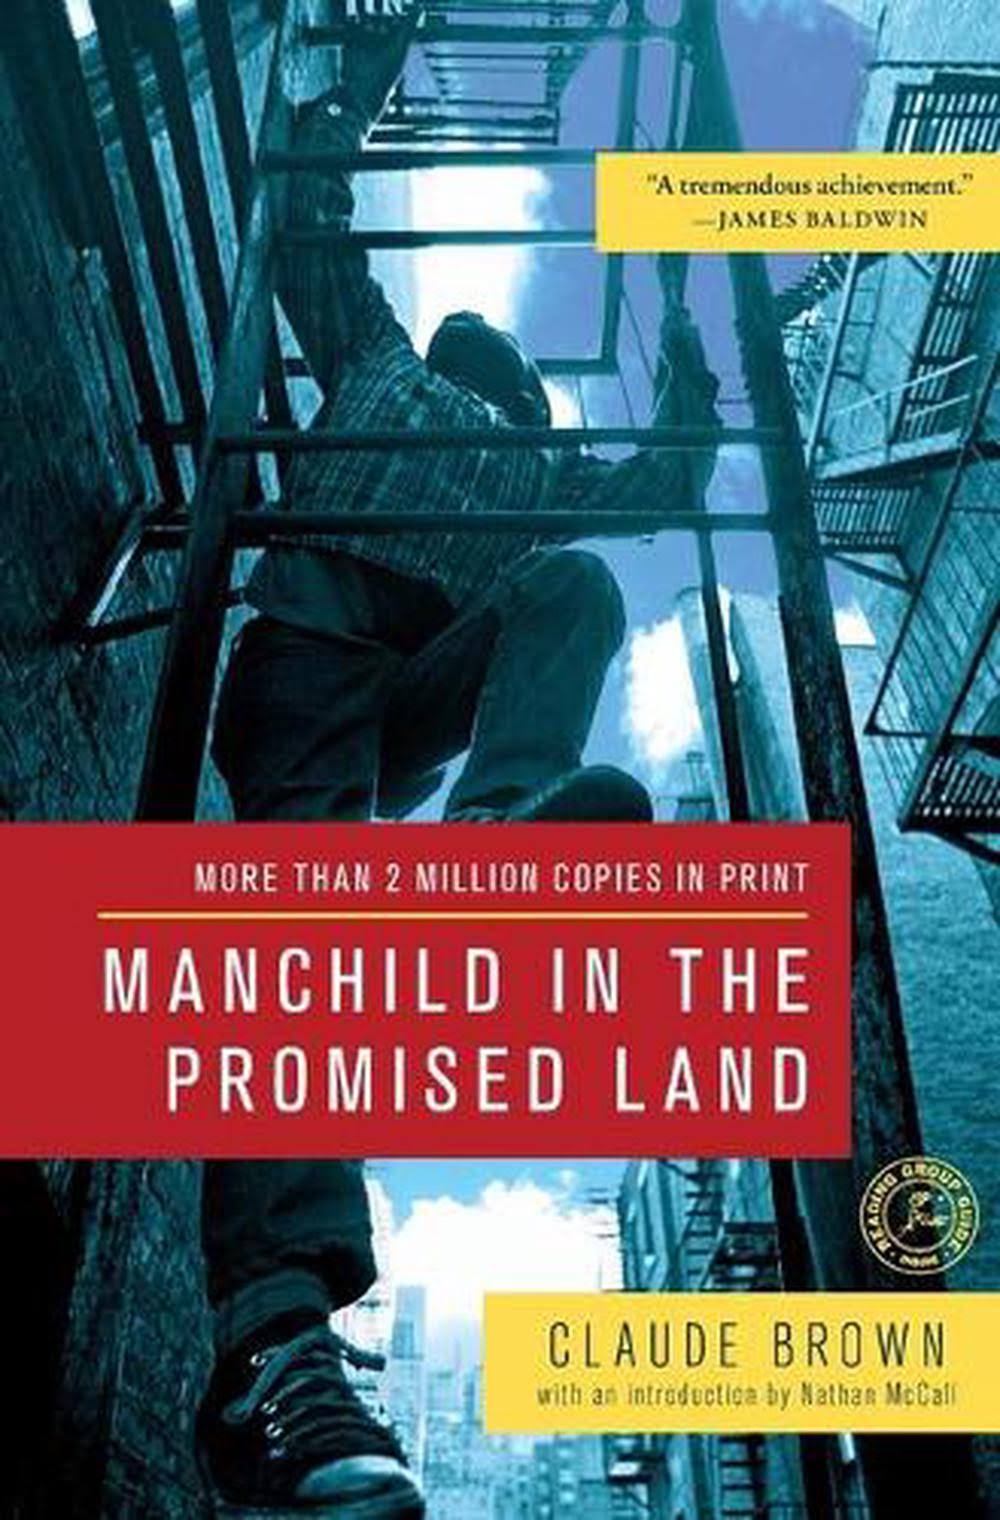 Manchild in The Promised Land by Claude Brown